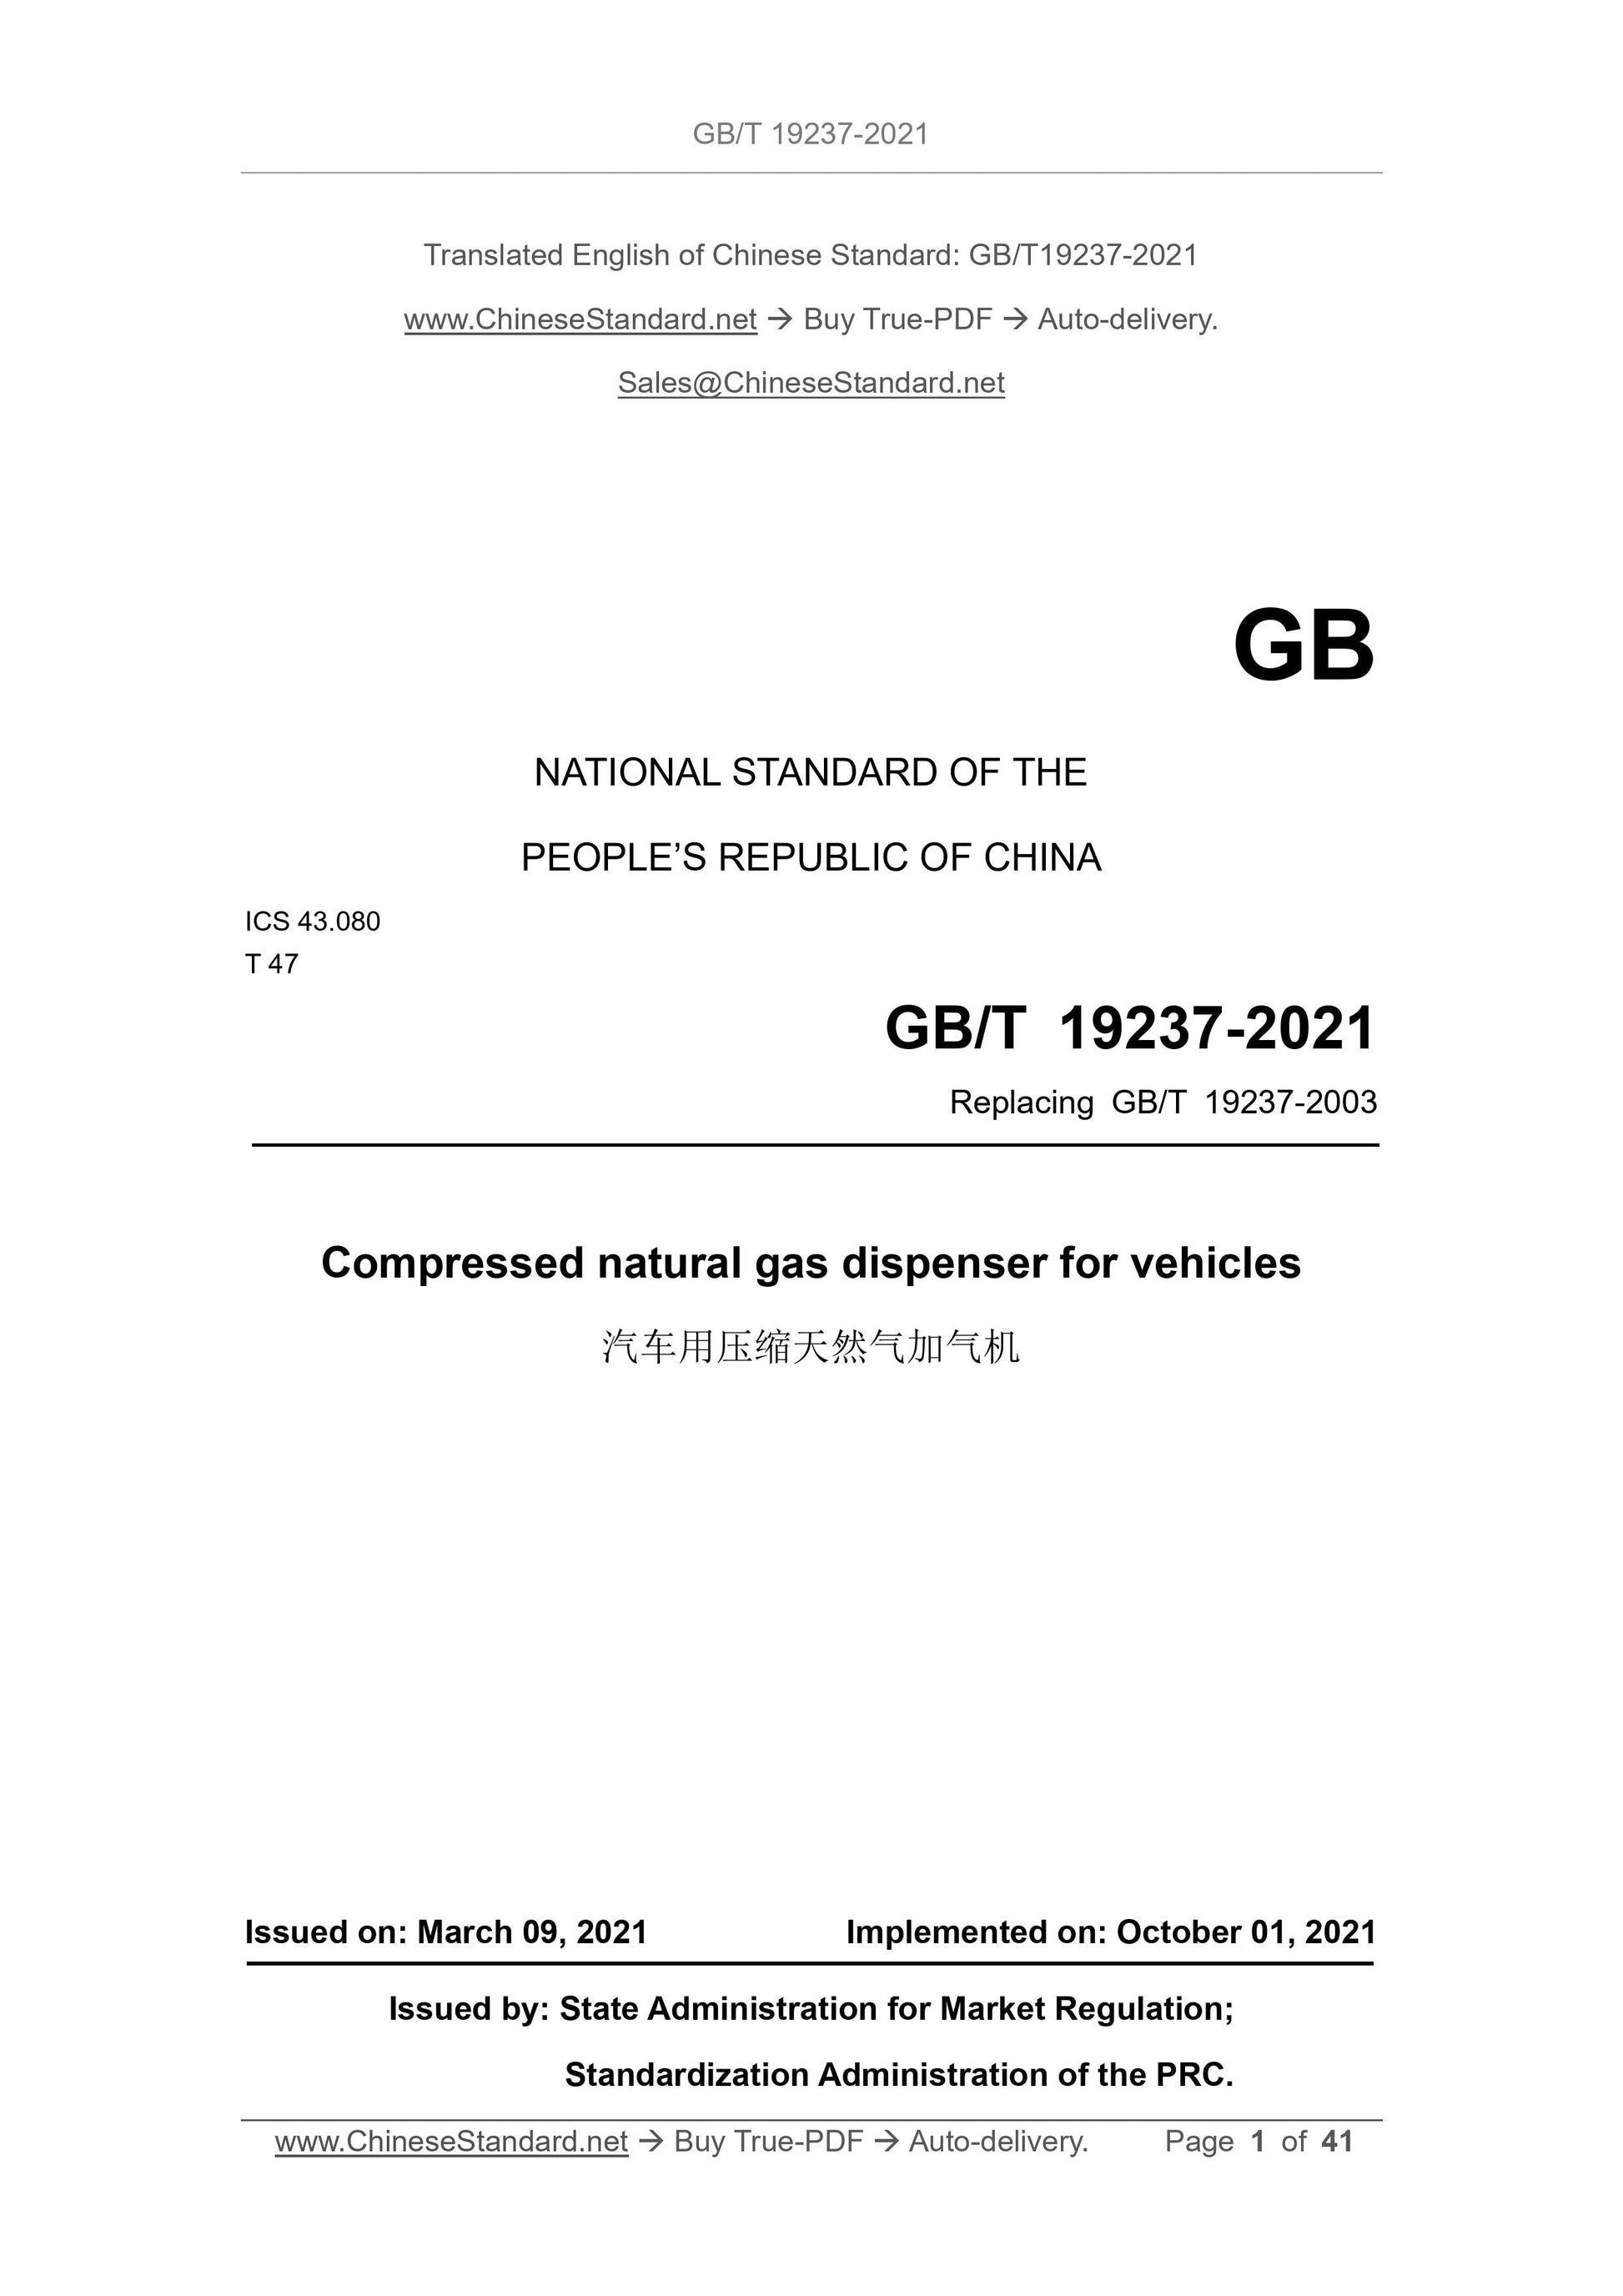 GB/T 19237-2021 Page 1